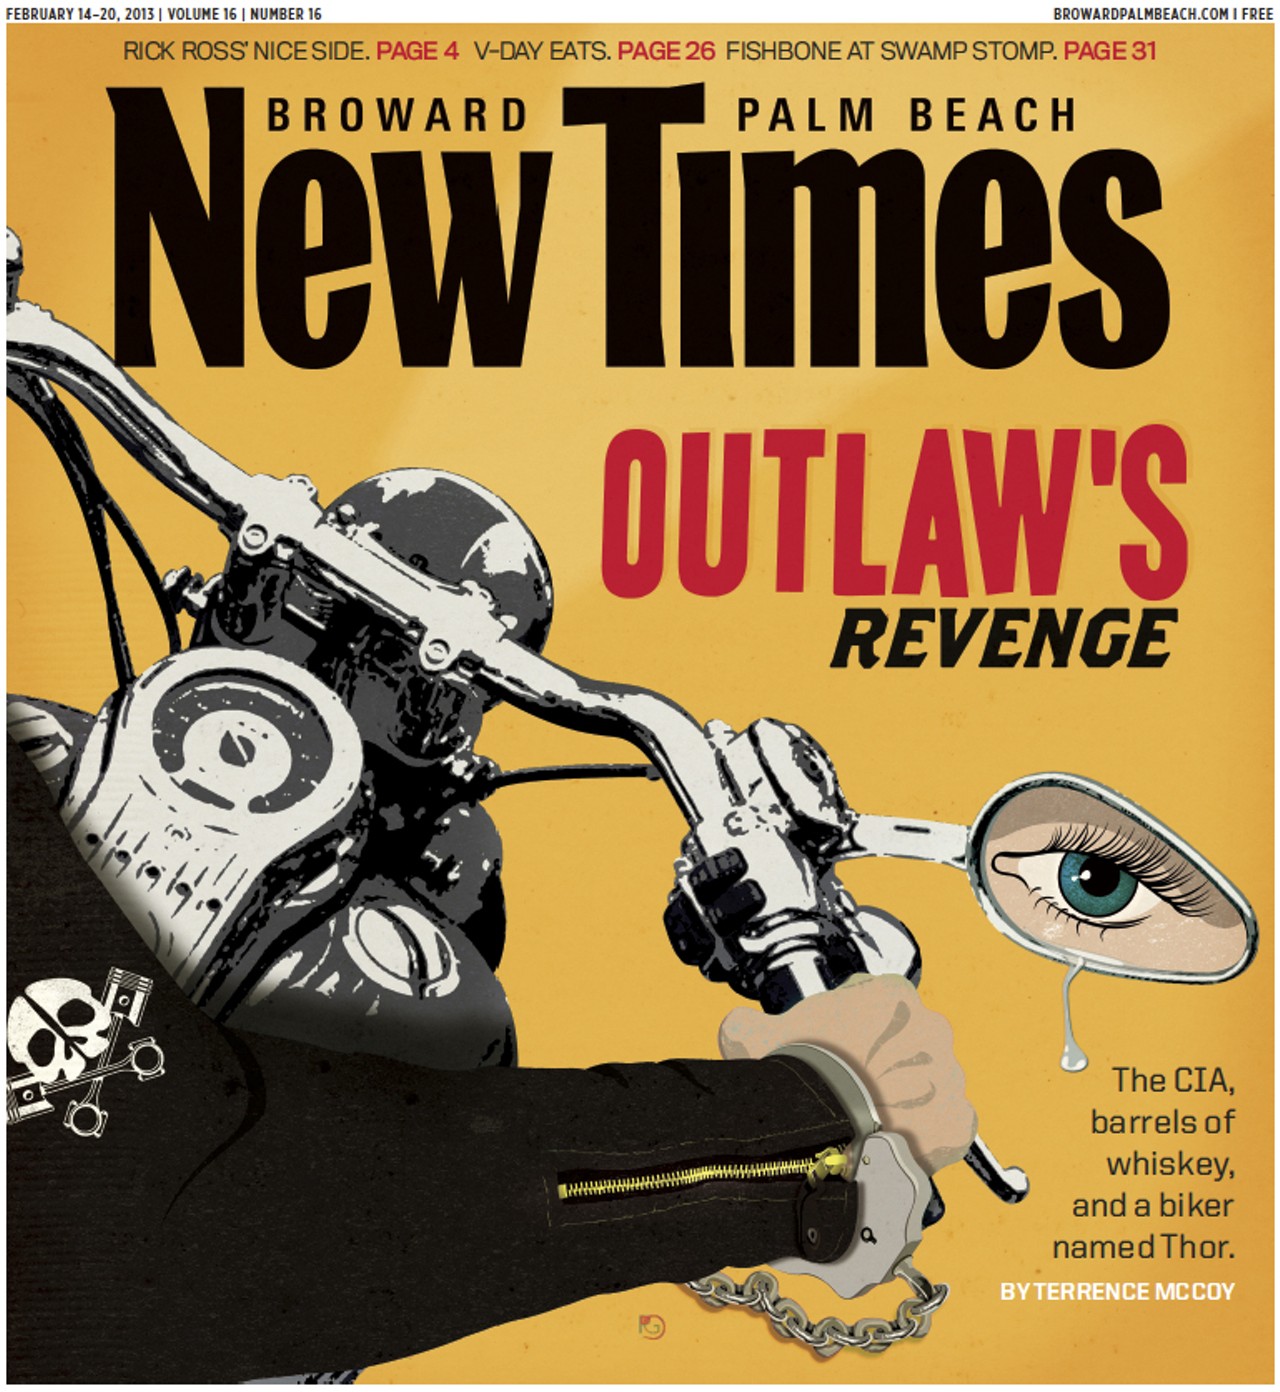 "CIA Operatives, Barrels of Whiskey, and a Biker Named Thor," by Terrence McCoy in the Broward-Palm Beach New Times.